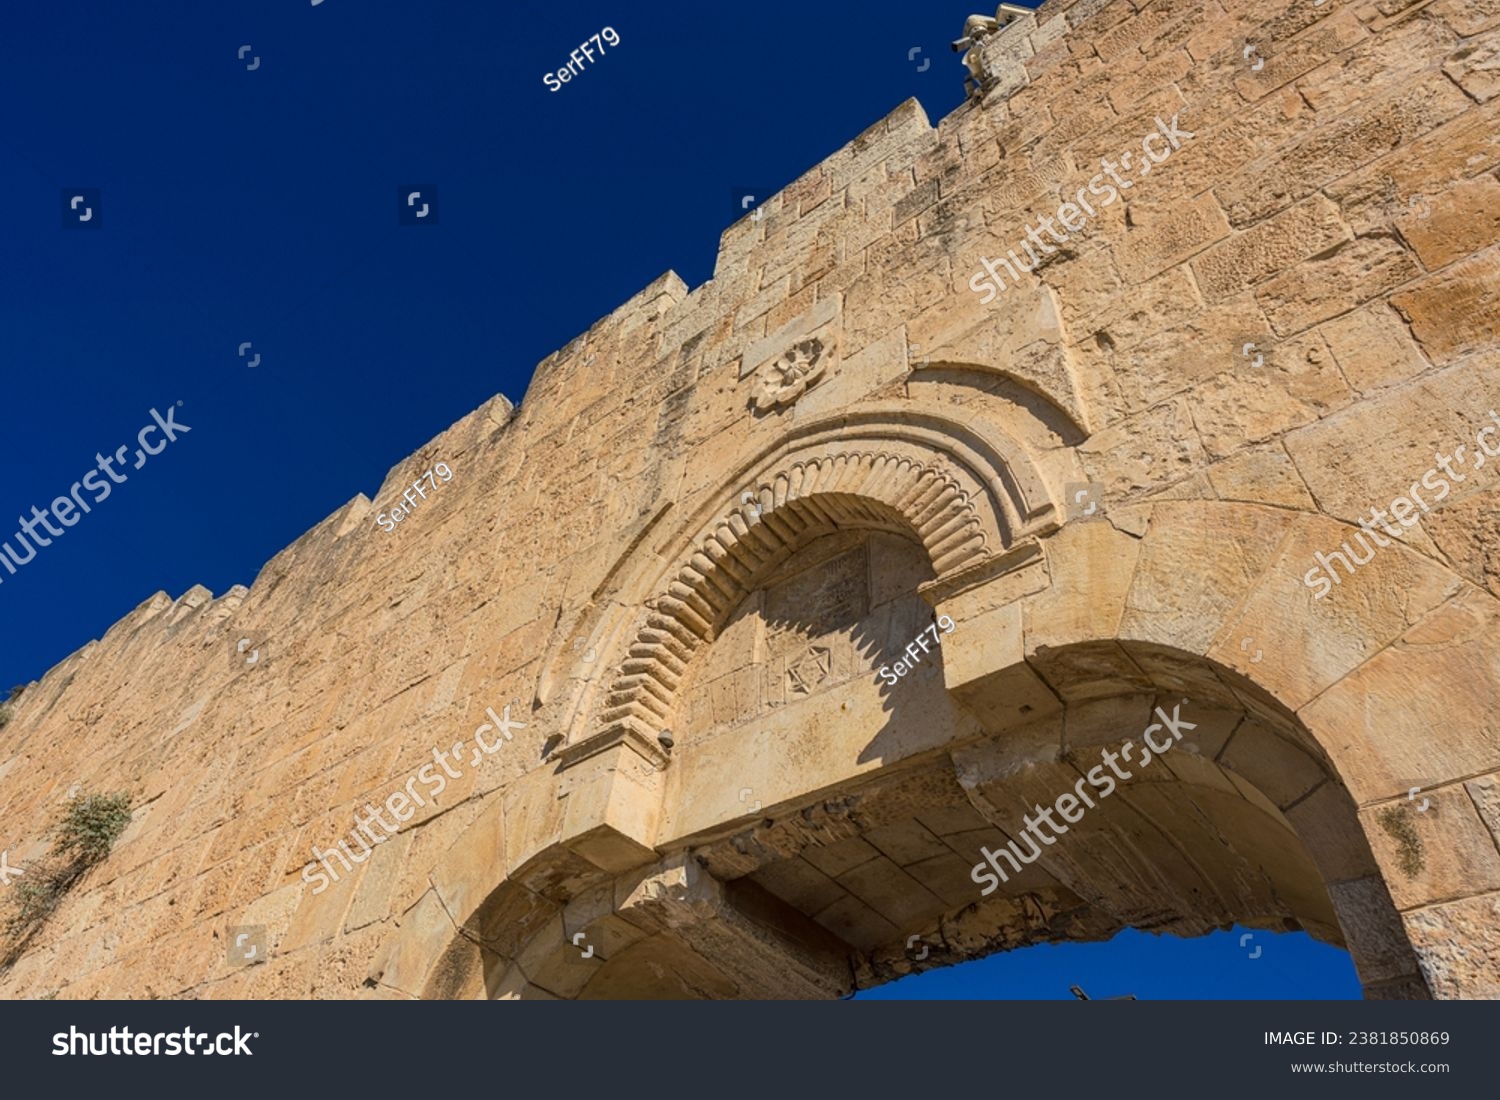 Low angle view of the Dung Gate in the Old city of Jerusalem #2381850869